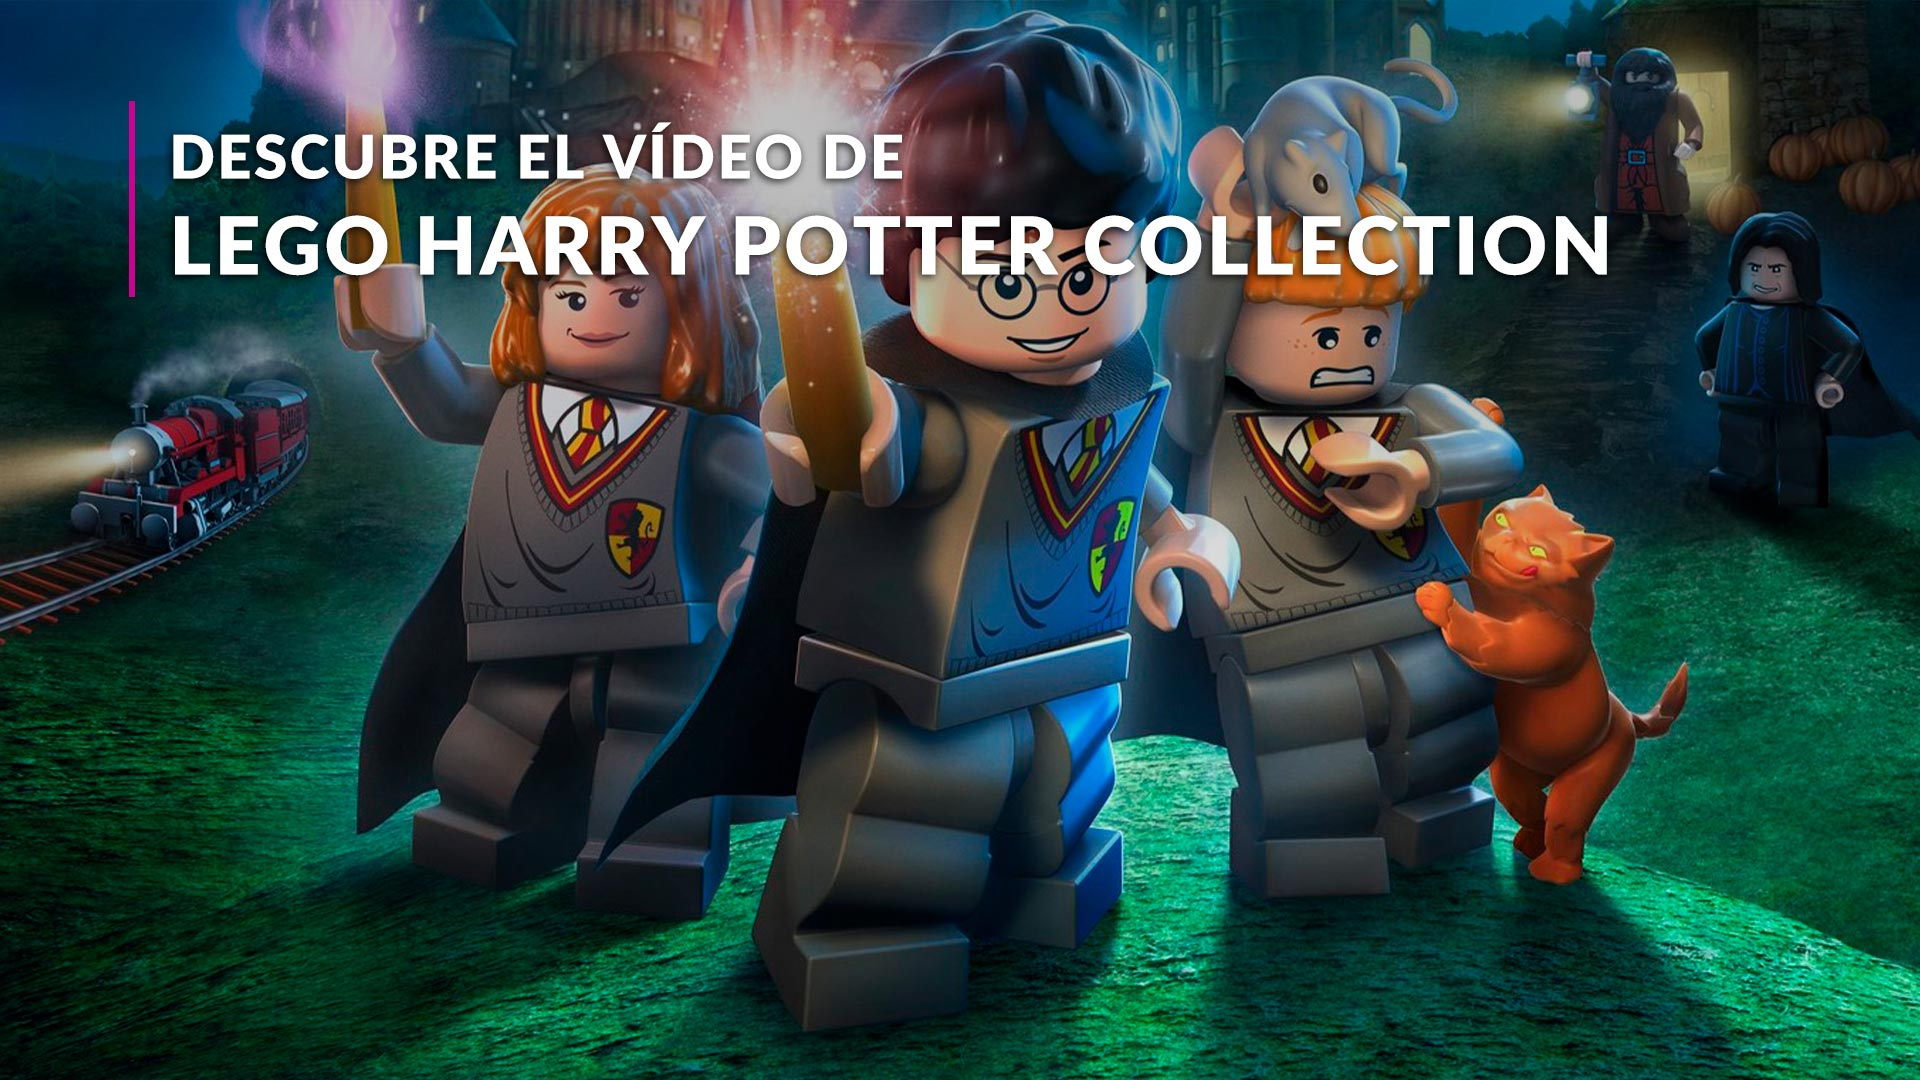 LEGO Harry Potter Collection. Nintendo Switch